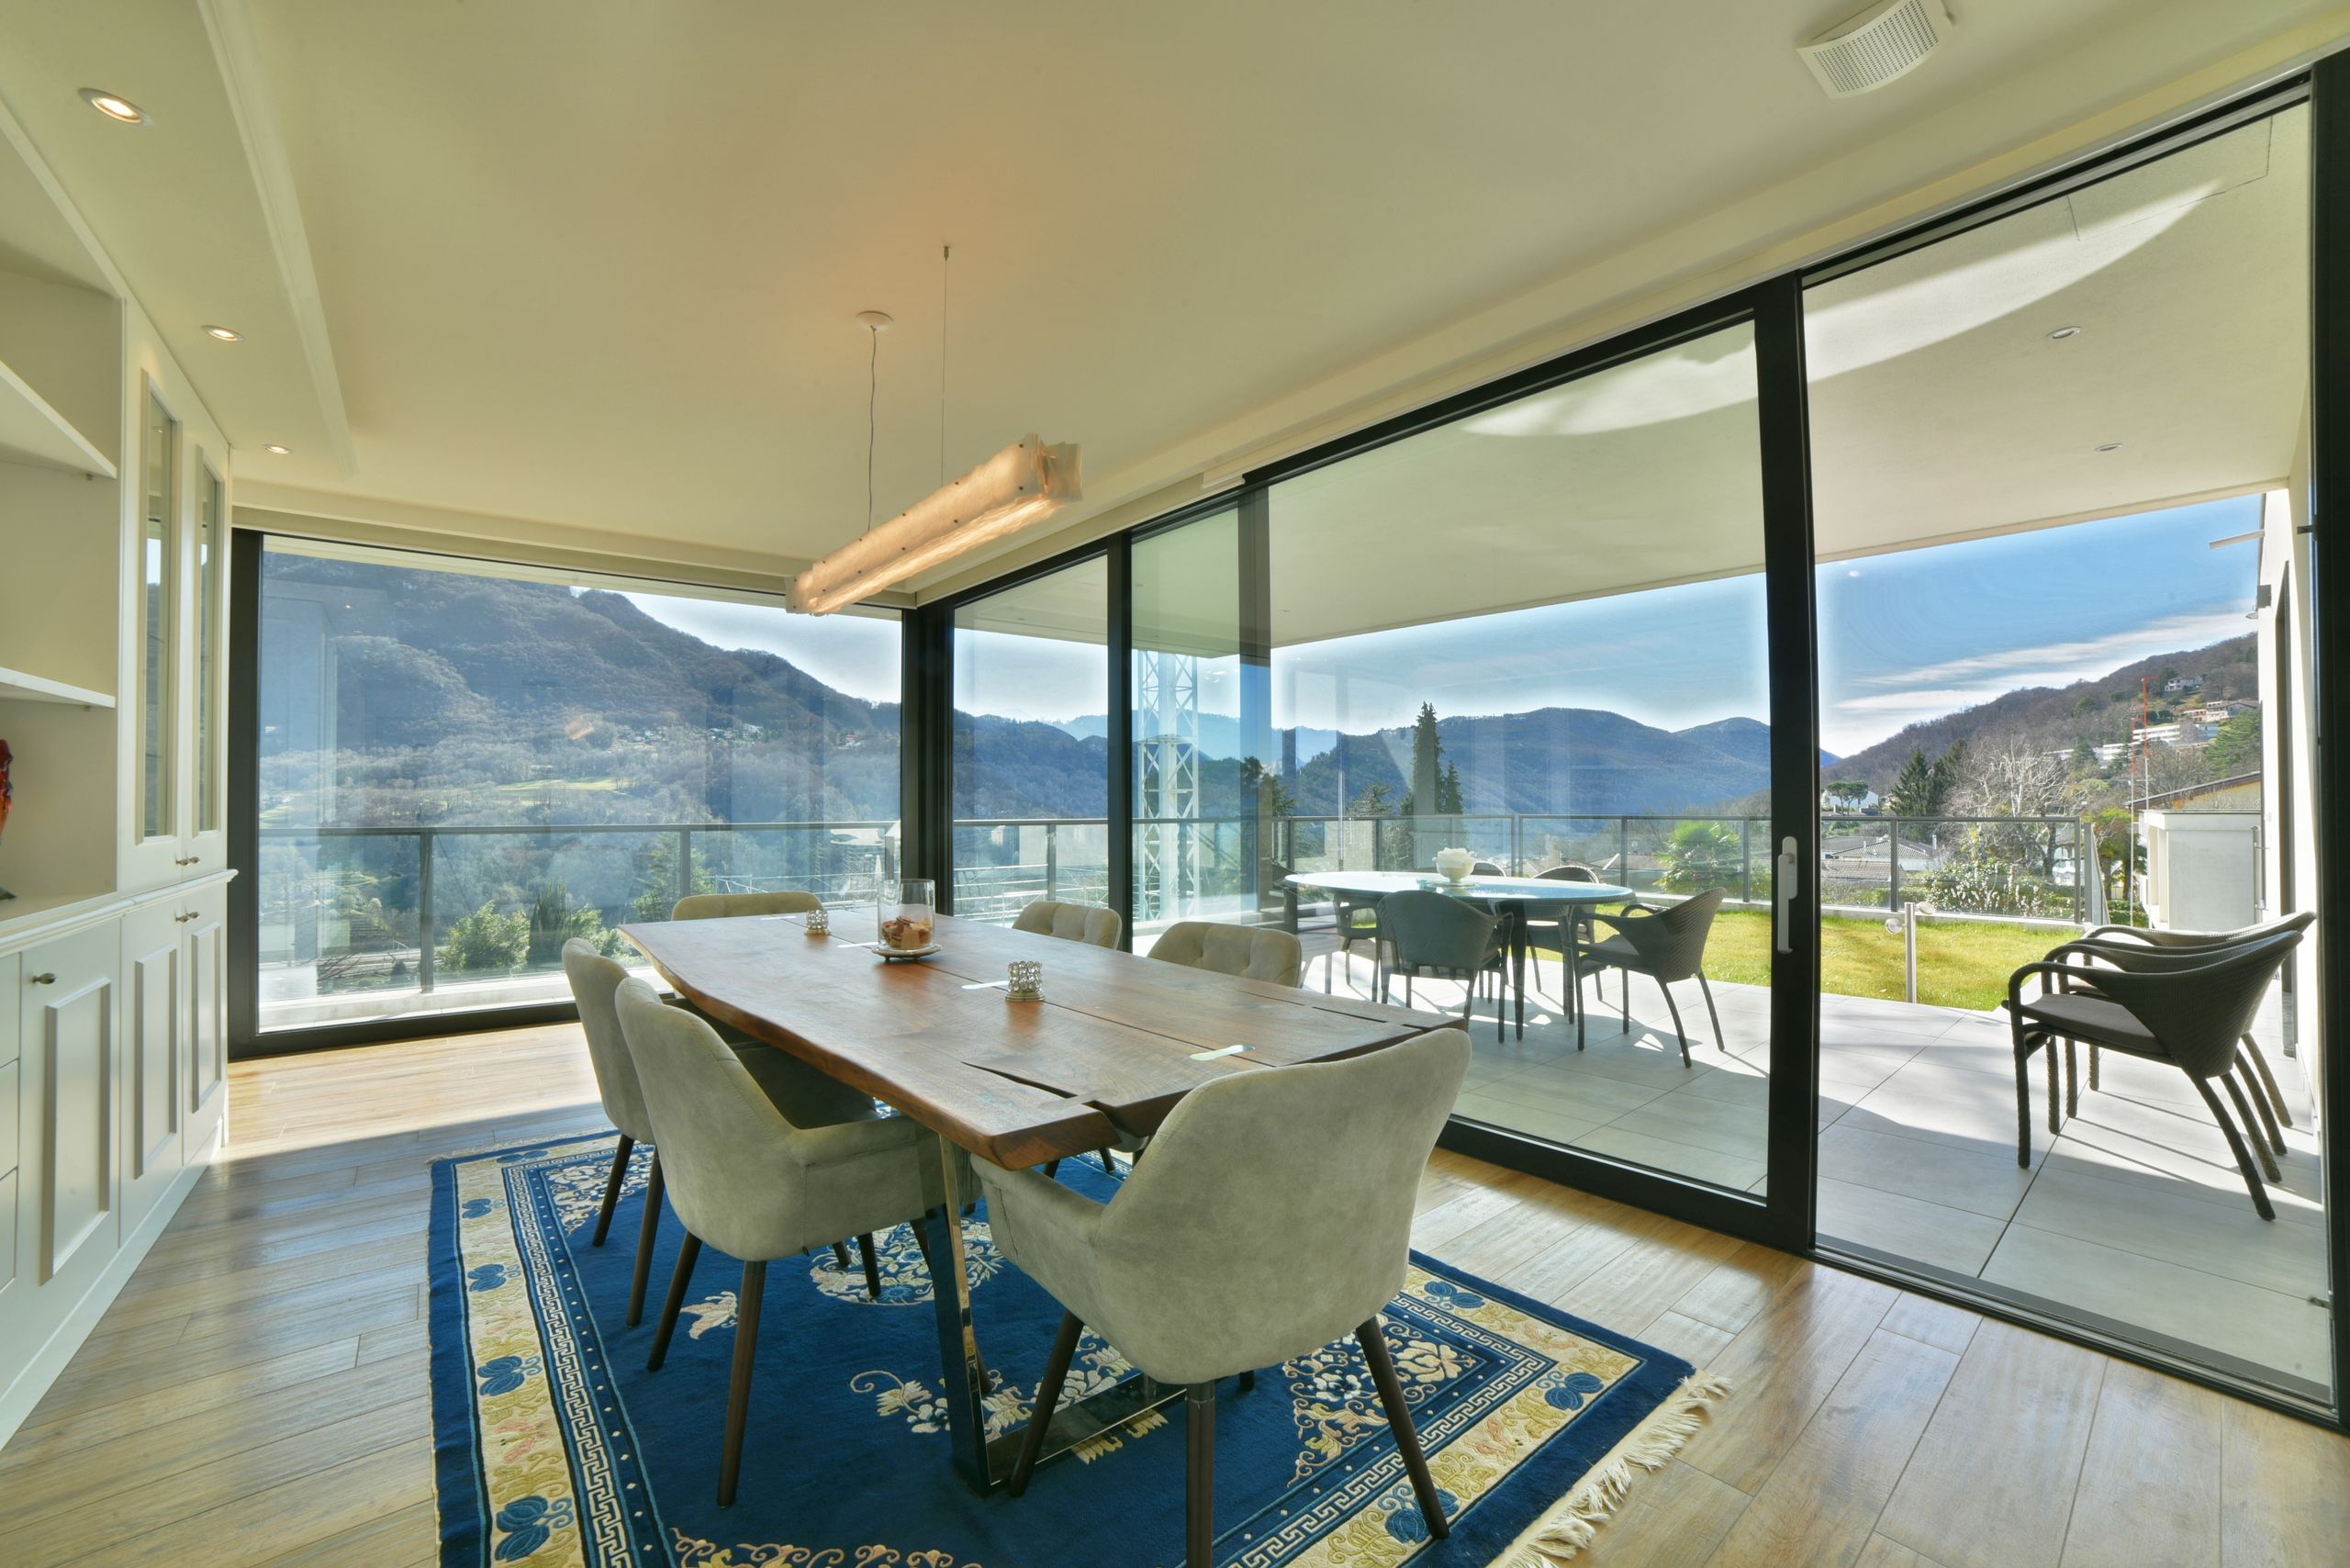 In Montagnola (Collina d'Oro), in a prestigious very quiet and sunny residential area , 4 km from the center of Lugano and only 450 meters from the American school TASIS, we offer for sale this ultra modern luxury villa with beautiful panoramic view of lake Lugano and surrounding mountains.

Built in 2018 with high quality materials and luxury finishes, the villa features 6 bedrooms, 8 bathrooms, large covered terrace (summer lounge) with flat garden, SPA area with heated indoor pool, fitness room, sauna, hammam, Whirlpool and a large garage for 4 cars.

The villa with a total area of ​​approx. 680 m2 is arranged on 2 levels as follows:

UPPER FLOOR:
Graceful entrance hall, living room with large floor-to-ceiling windows and magnificent panoramic views of the surrounding mountains, dining room, exit to the covered terrace (summer lounge) and flat garden; kitchen with dining room, guest WC; 2 single bedrooms with en-suite bathrooms, hobby room; master bedroom with walk-in closet, en-suite bathroom and exit to the garden; office / bedroom, bathroom, 2 walk-in closets.

GROUND FLOOR:
Two-room apartment with independent entrance (living room with kitchen, bedroom with en-suite bathroom); personnel / guest room, bathroom, rack room, laundry; home cinema; Wellness area with heated swimming pool, whirlpool, sauna, hammam, fitness room, shower, bathroom, changing room, technical room; 100 sqm garage for 4 cars, 2 outdoor parking spaces.

The villa uses alternative energy sources and is equipped with a latest generation home automation system, air conditioning and alarm system.

Heating: classic electric heat pump + geothermal heating as a help (about 12 degrees). There are 5 geothermal probes that go to the depth of 140 meters and which allow a circulation of warmer water in the floor coils.

There is an underground tank of 10'000 liters for the irrigation of the lawn, completely managed by home automation, therefore also remotely.

There is a heat pump for cooling, which in summer helps to lower the internal temperature of the house by 5/6 degrees, without the need to use air conditioning.